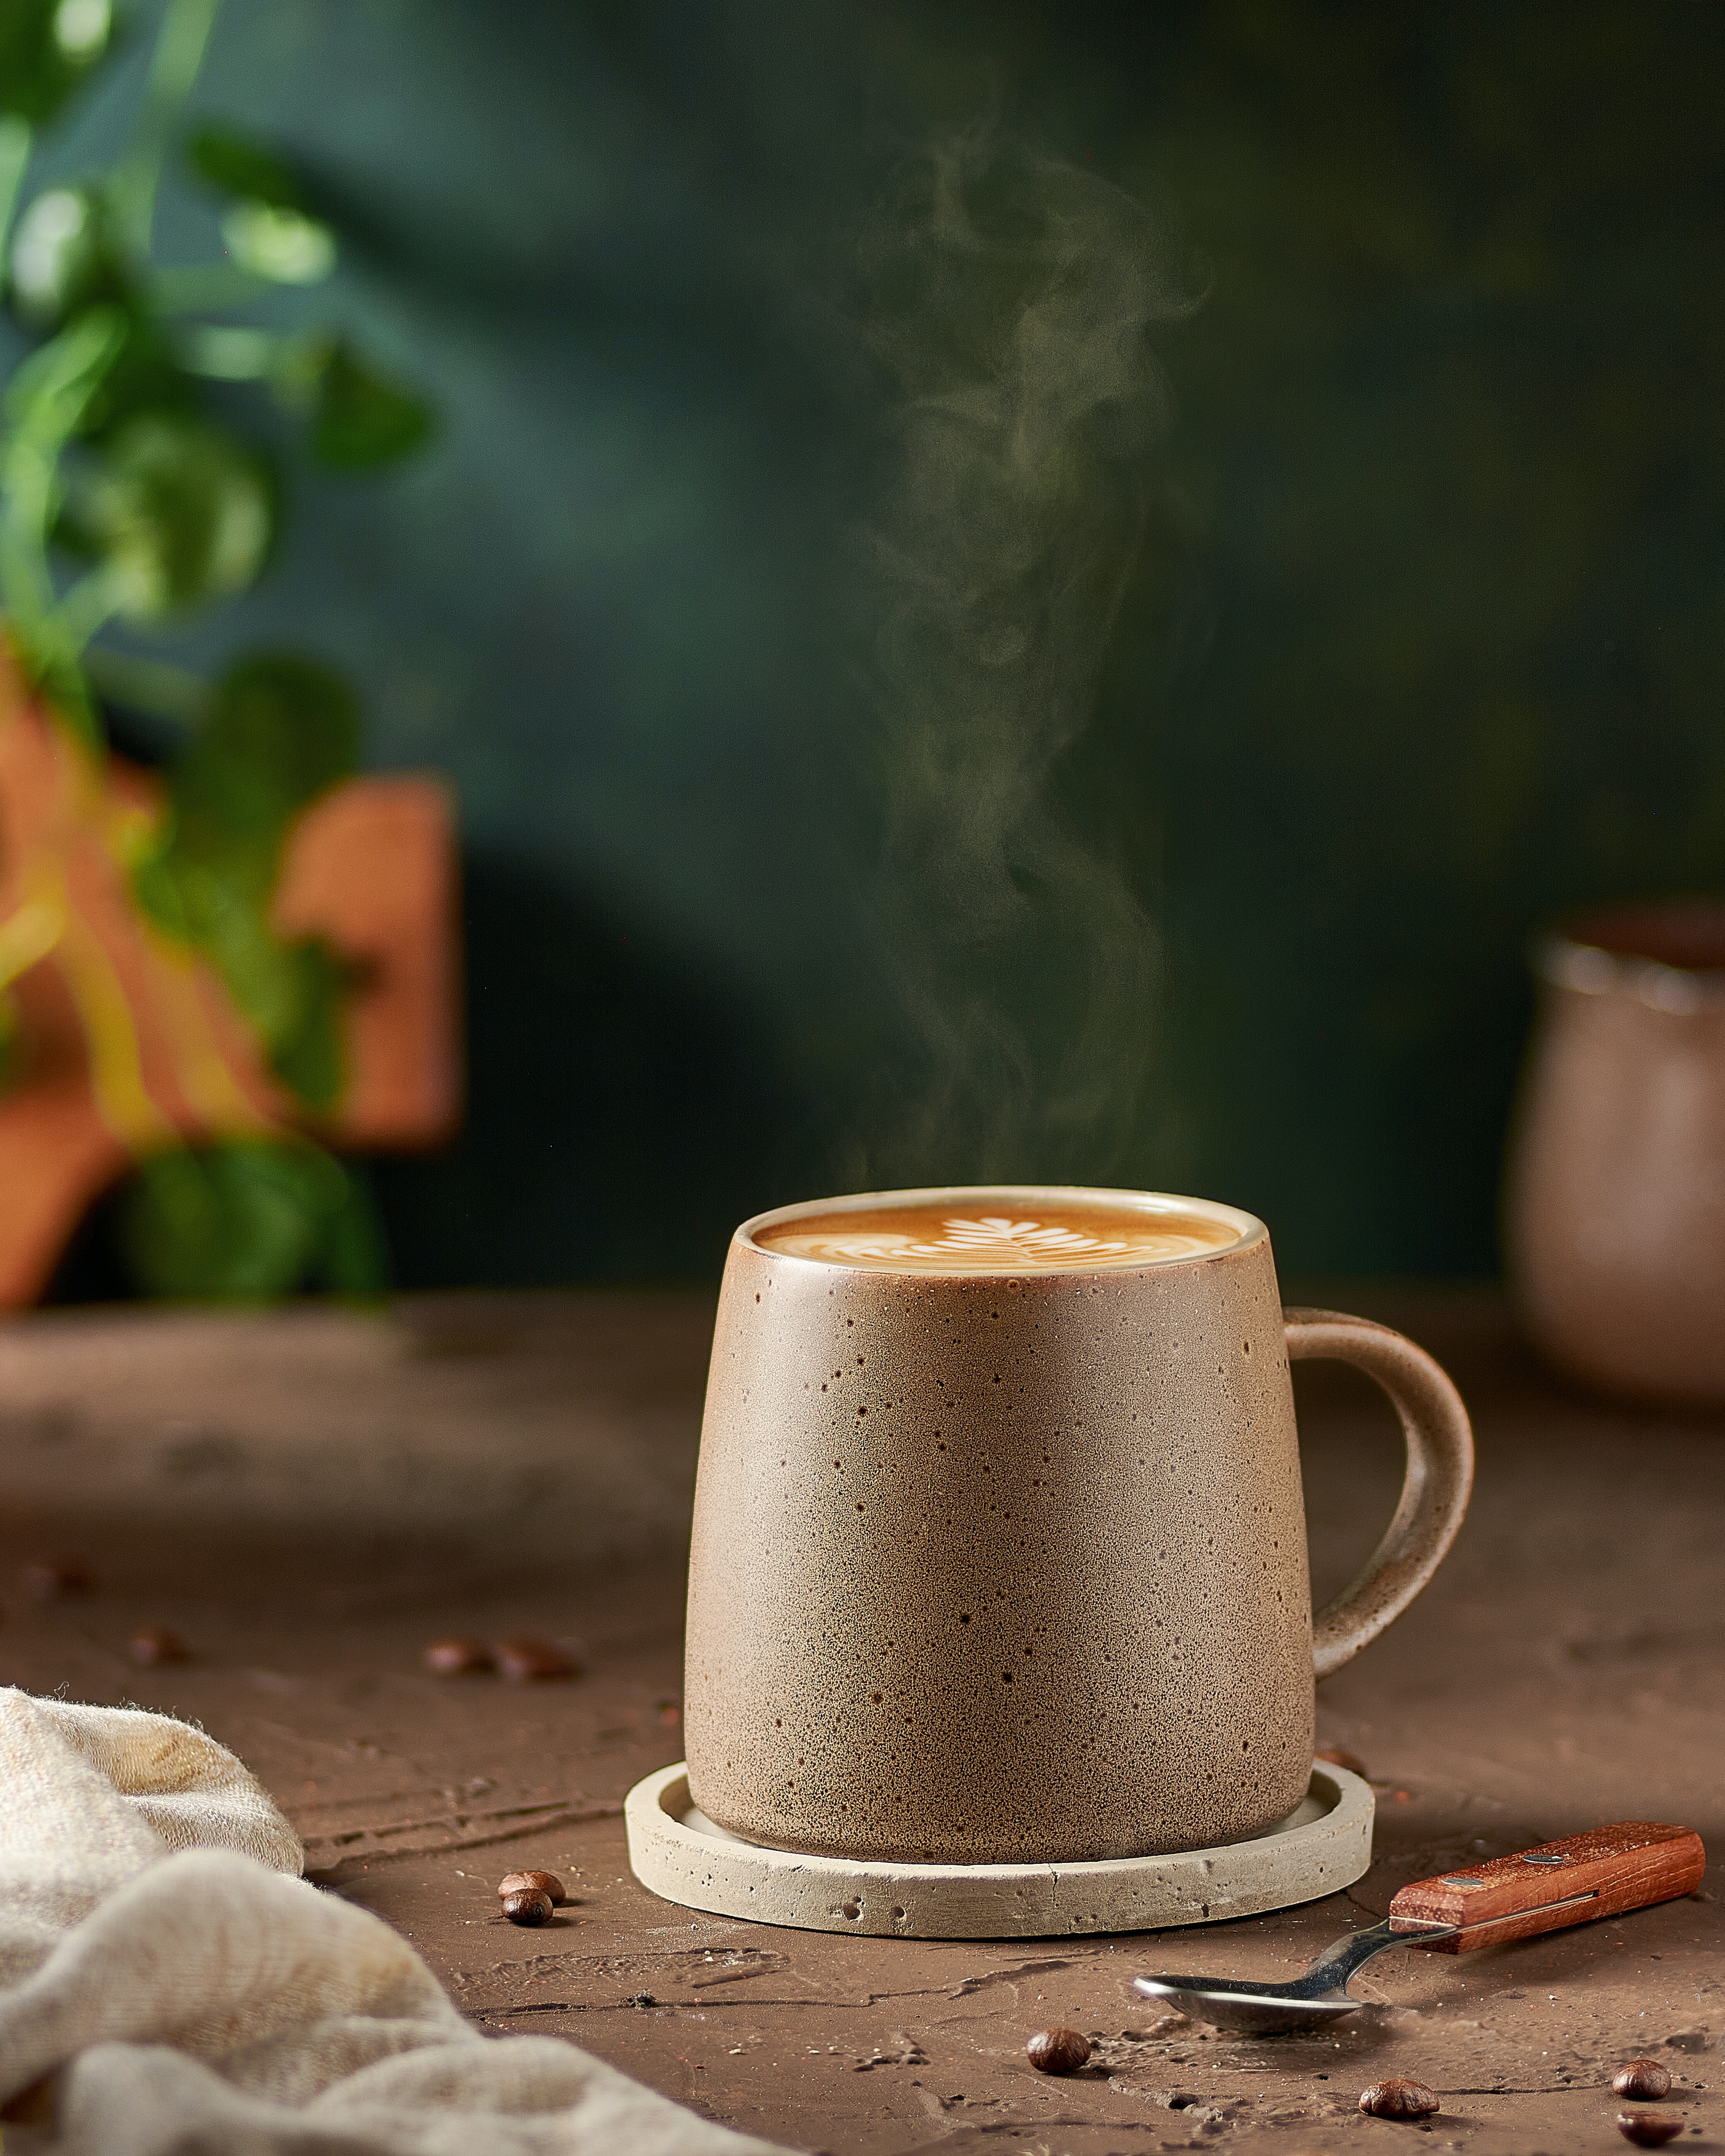 android coffee, cup, mug, steam, cappuccino, food, drink, beverage